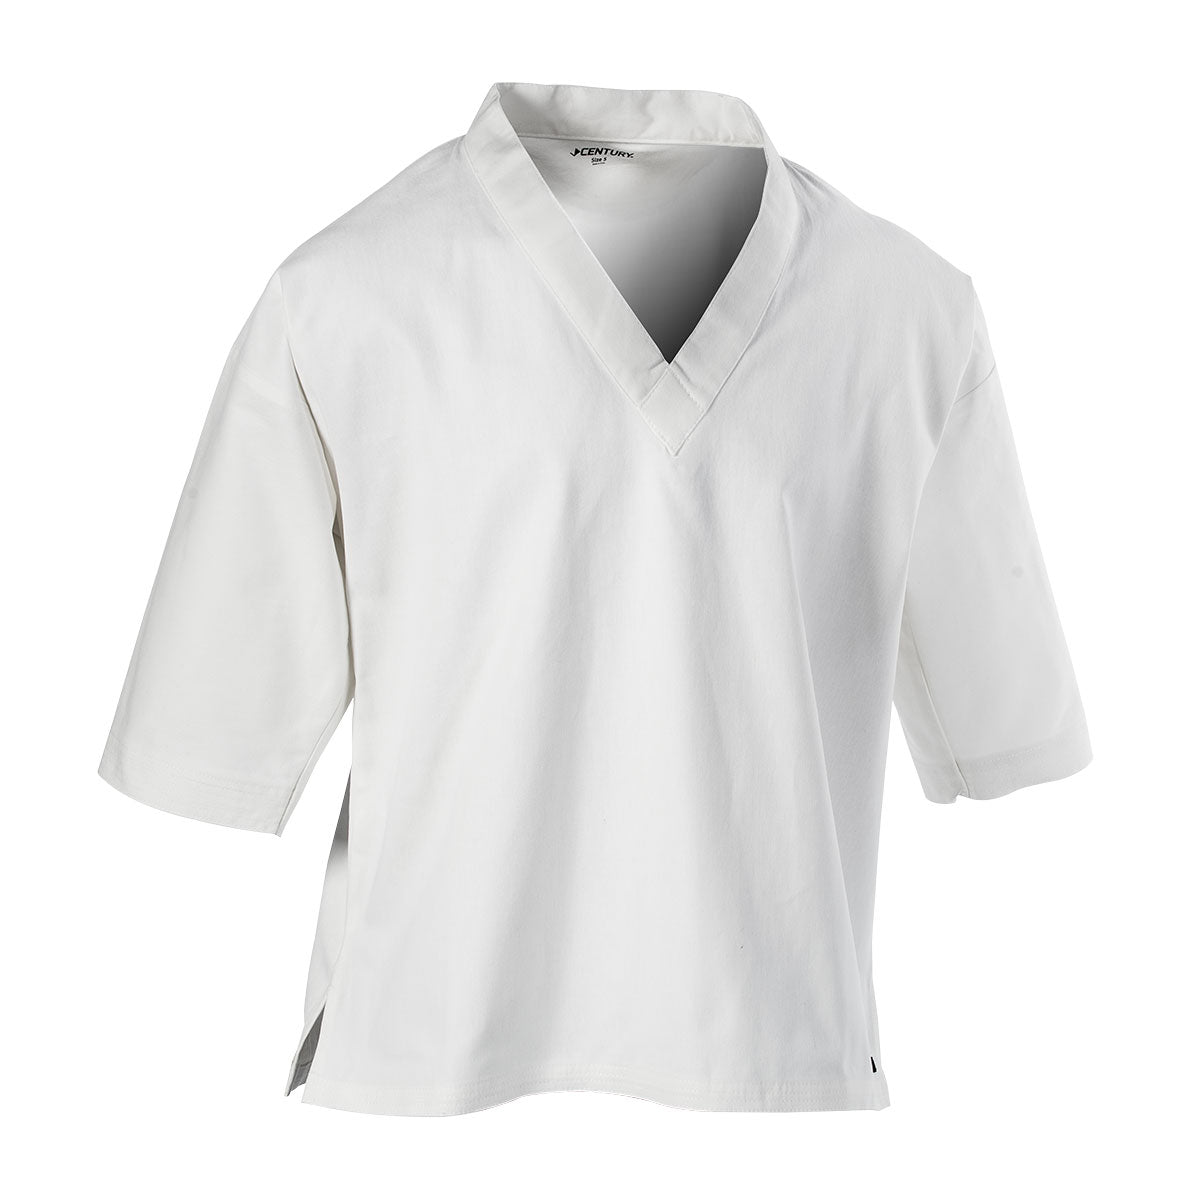 8 oz. Middleweight Brushed Cotton Pullover Top White